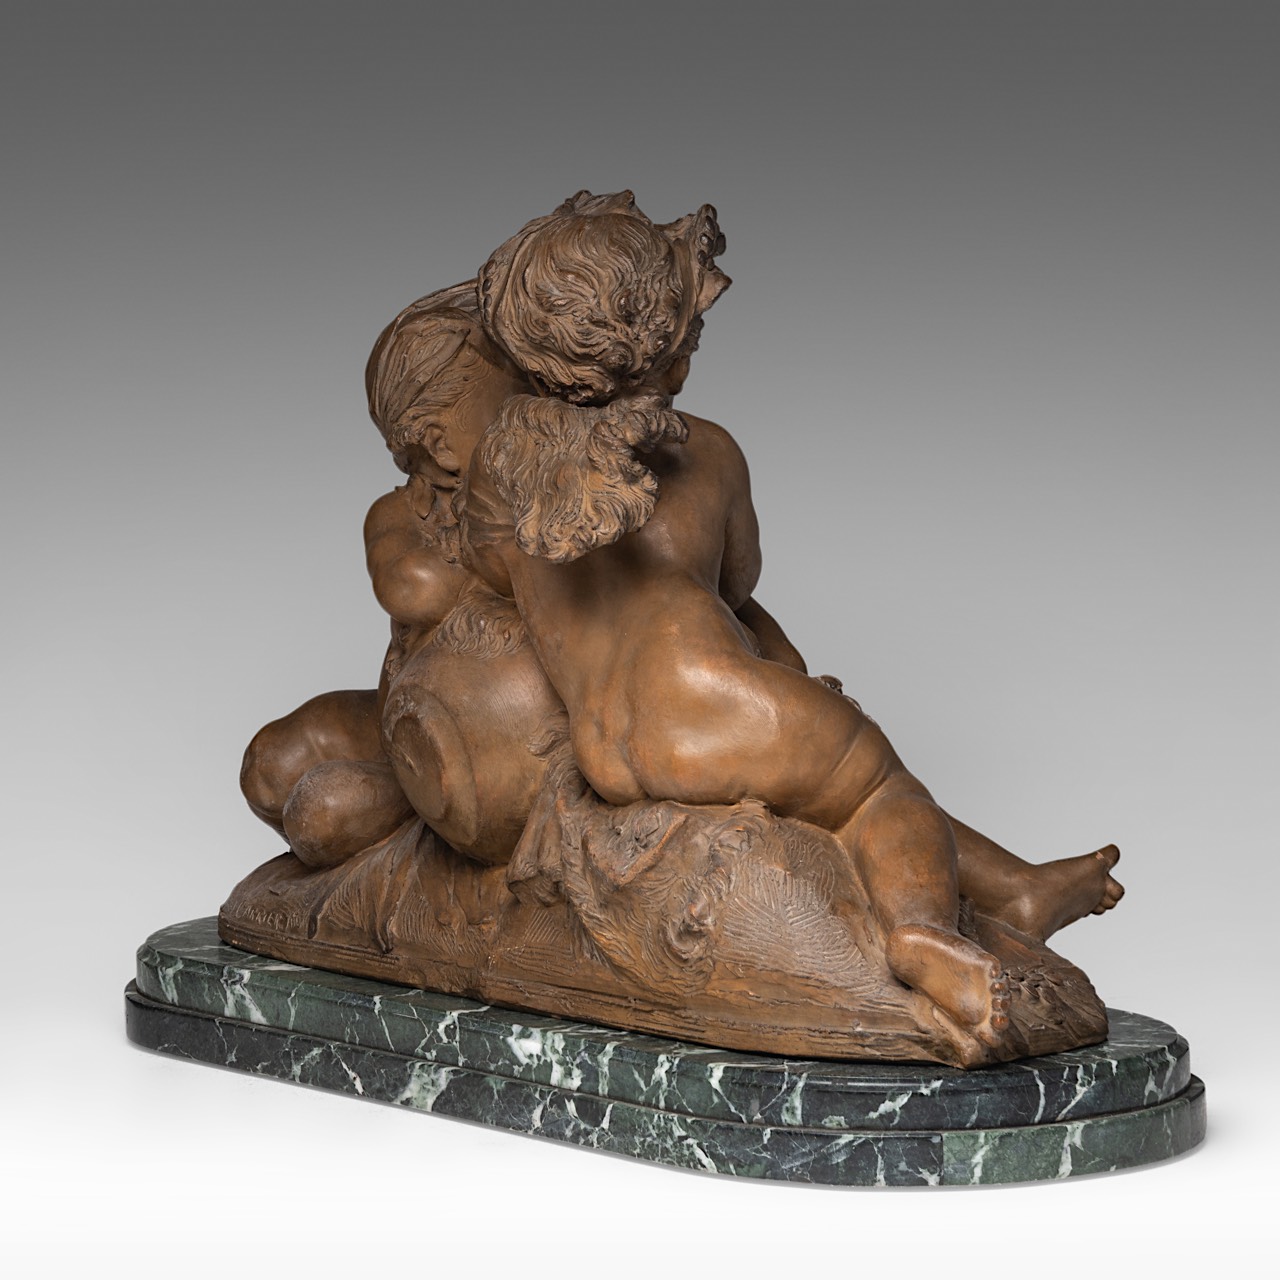 Carrier-Belleuse (1824-1887), two putti by the fountain, terracotta on a marble base, H 43 - W 68 cm - Image 6 of 10